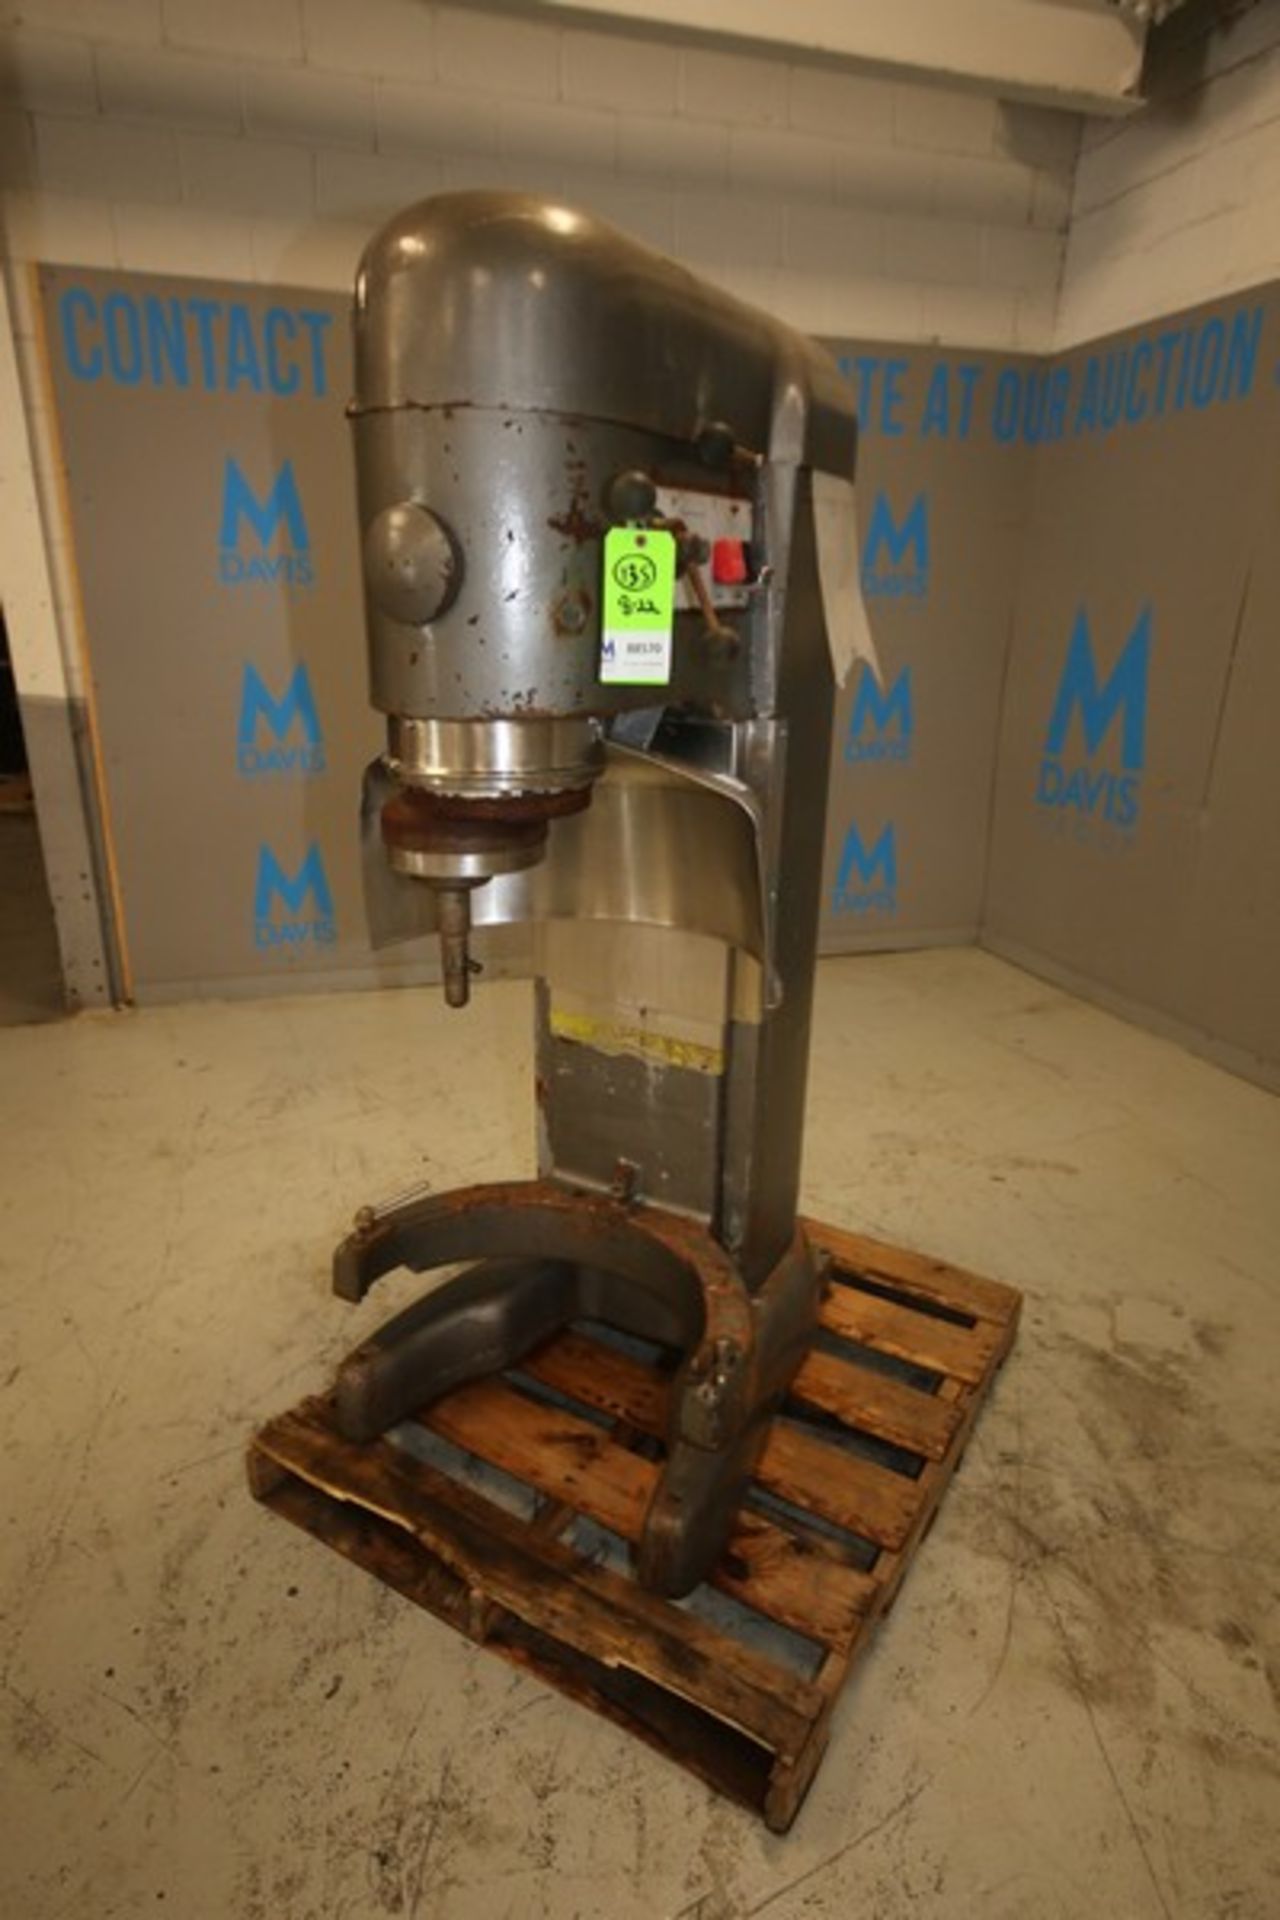 Hobart Vertical Mixer, Model V-1401, SN 11-308-265 Aprox. 5hp/1725 rpm(INV#88570)(Located @ the